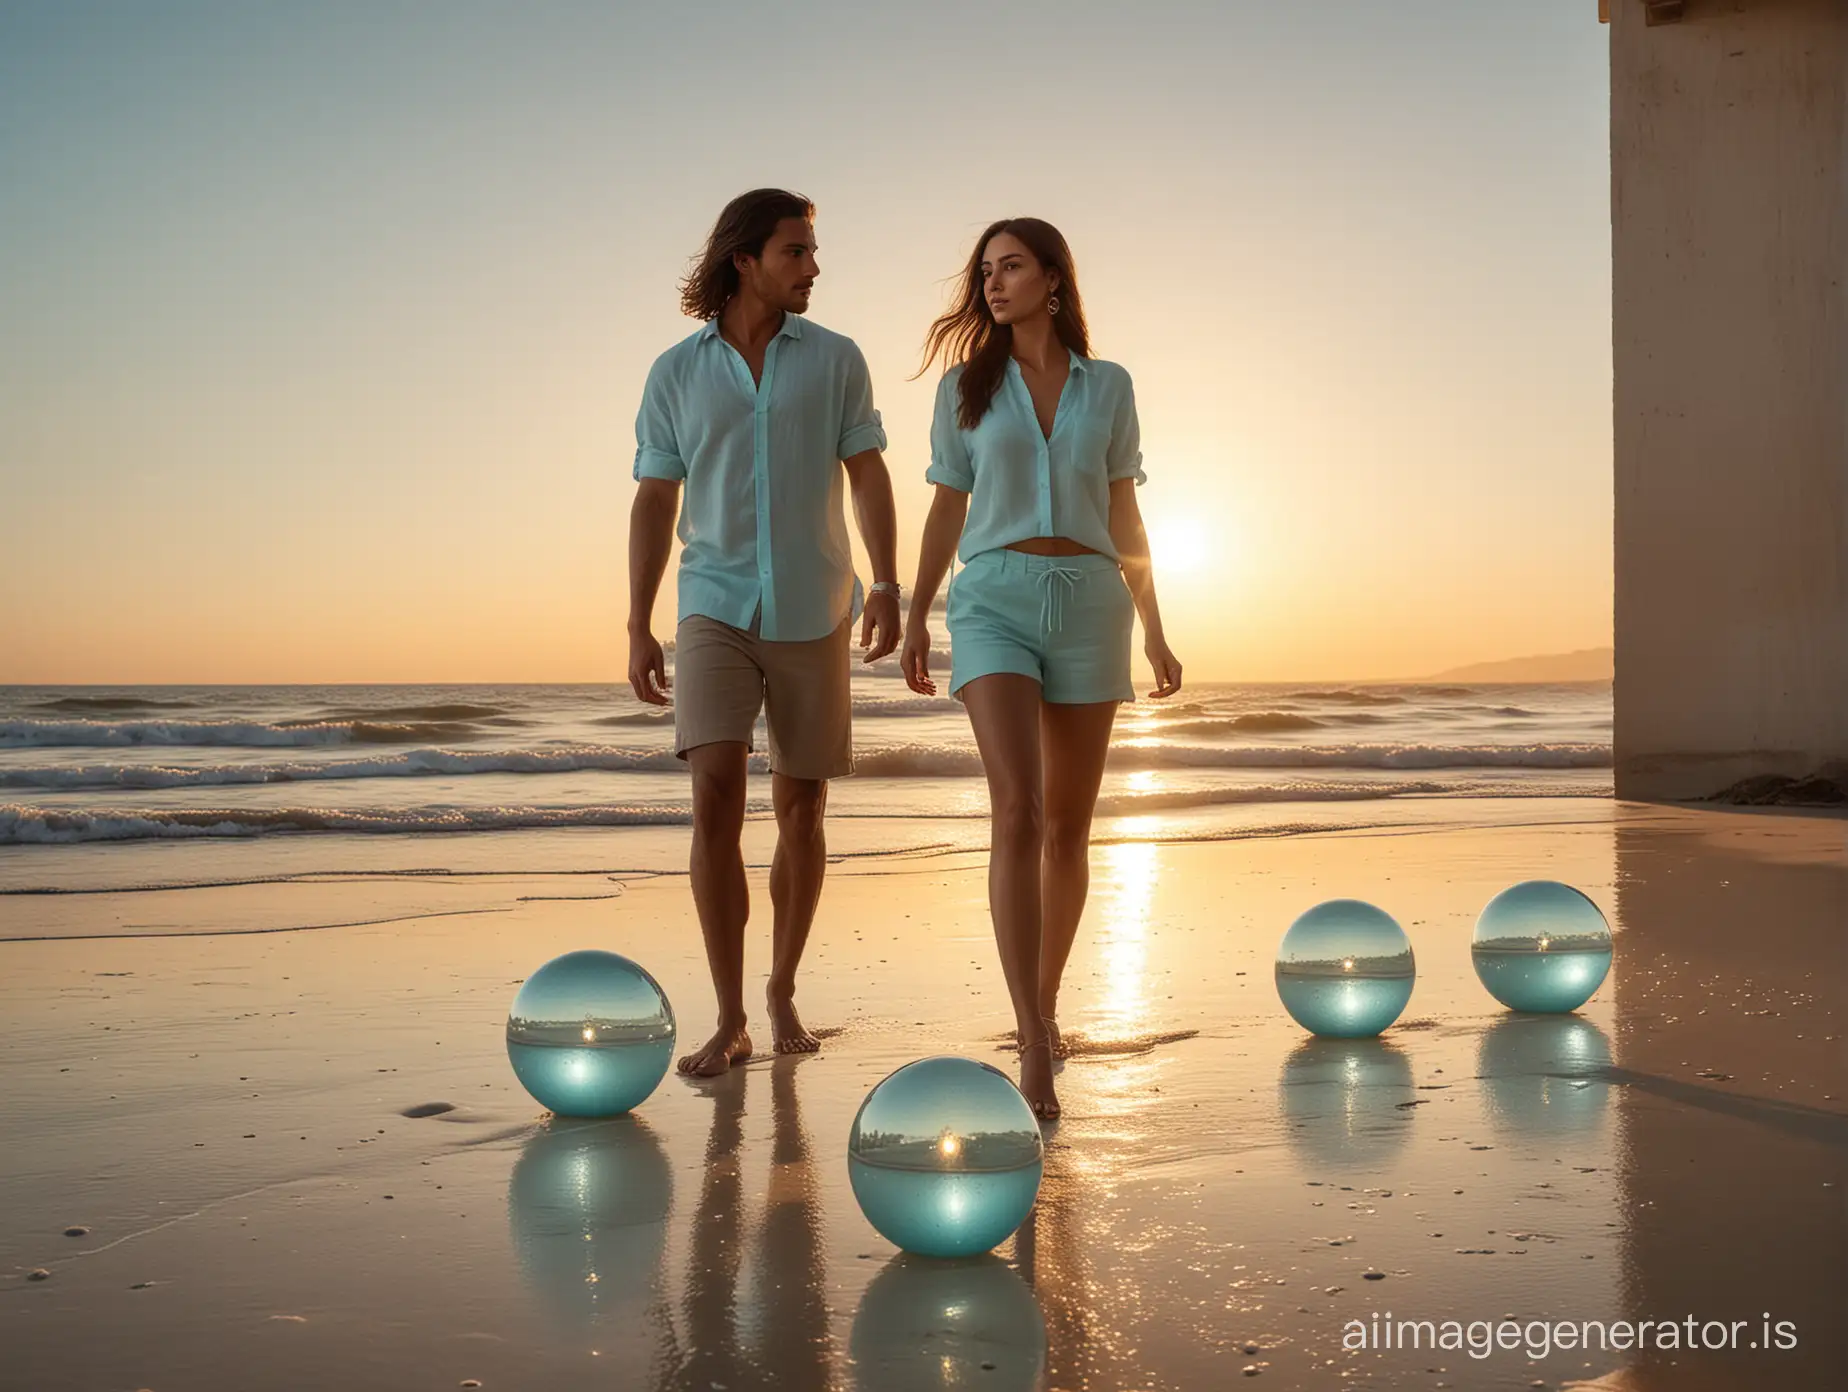 full body man and female Latin models with straight hair wearing elegant linen pale turquoise beach casual clothes, few big glass light spheres all over the floor,  during sunset dramatic shadows and reflections